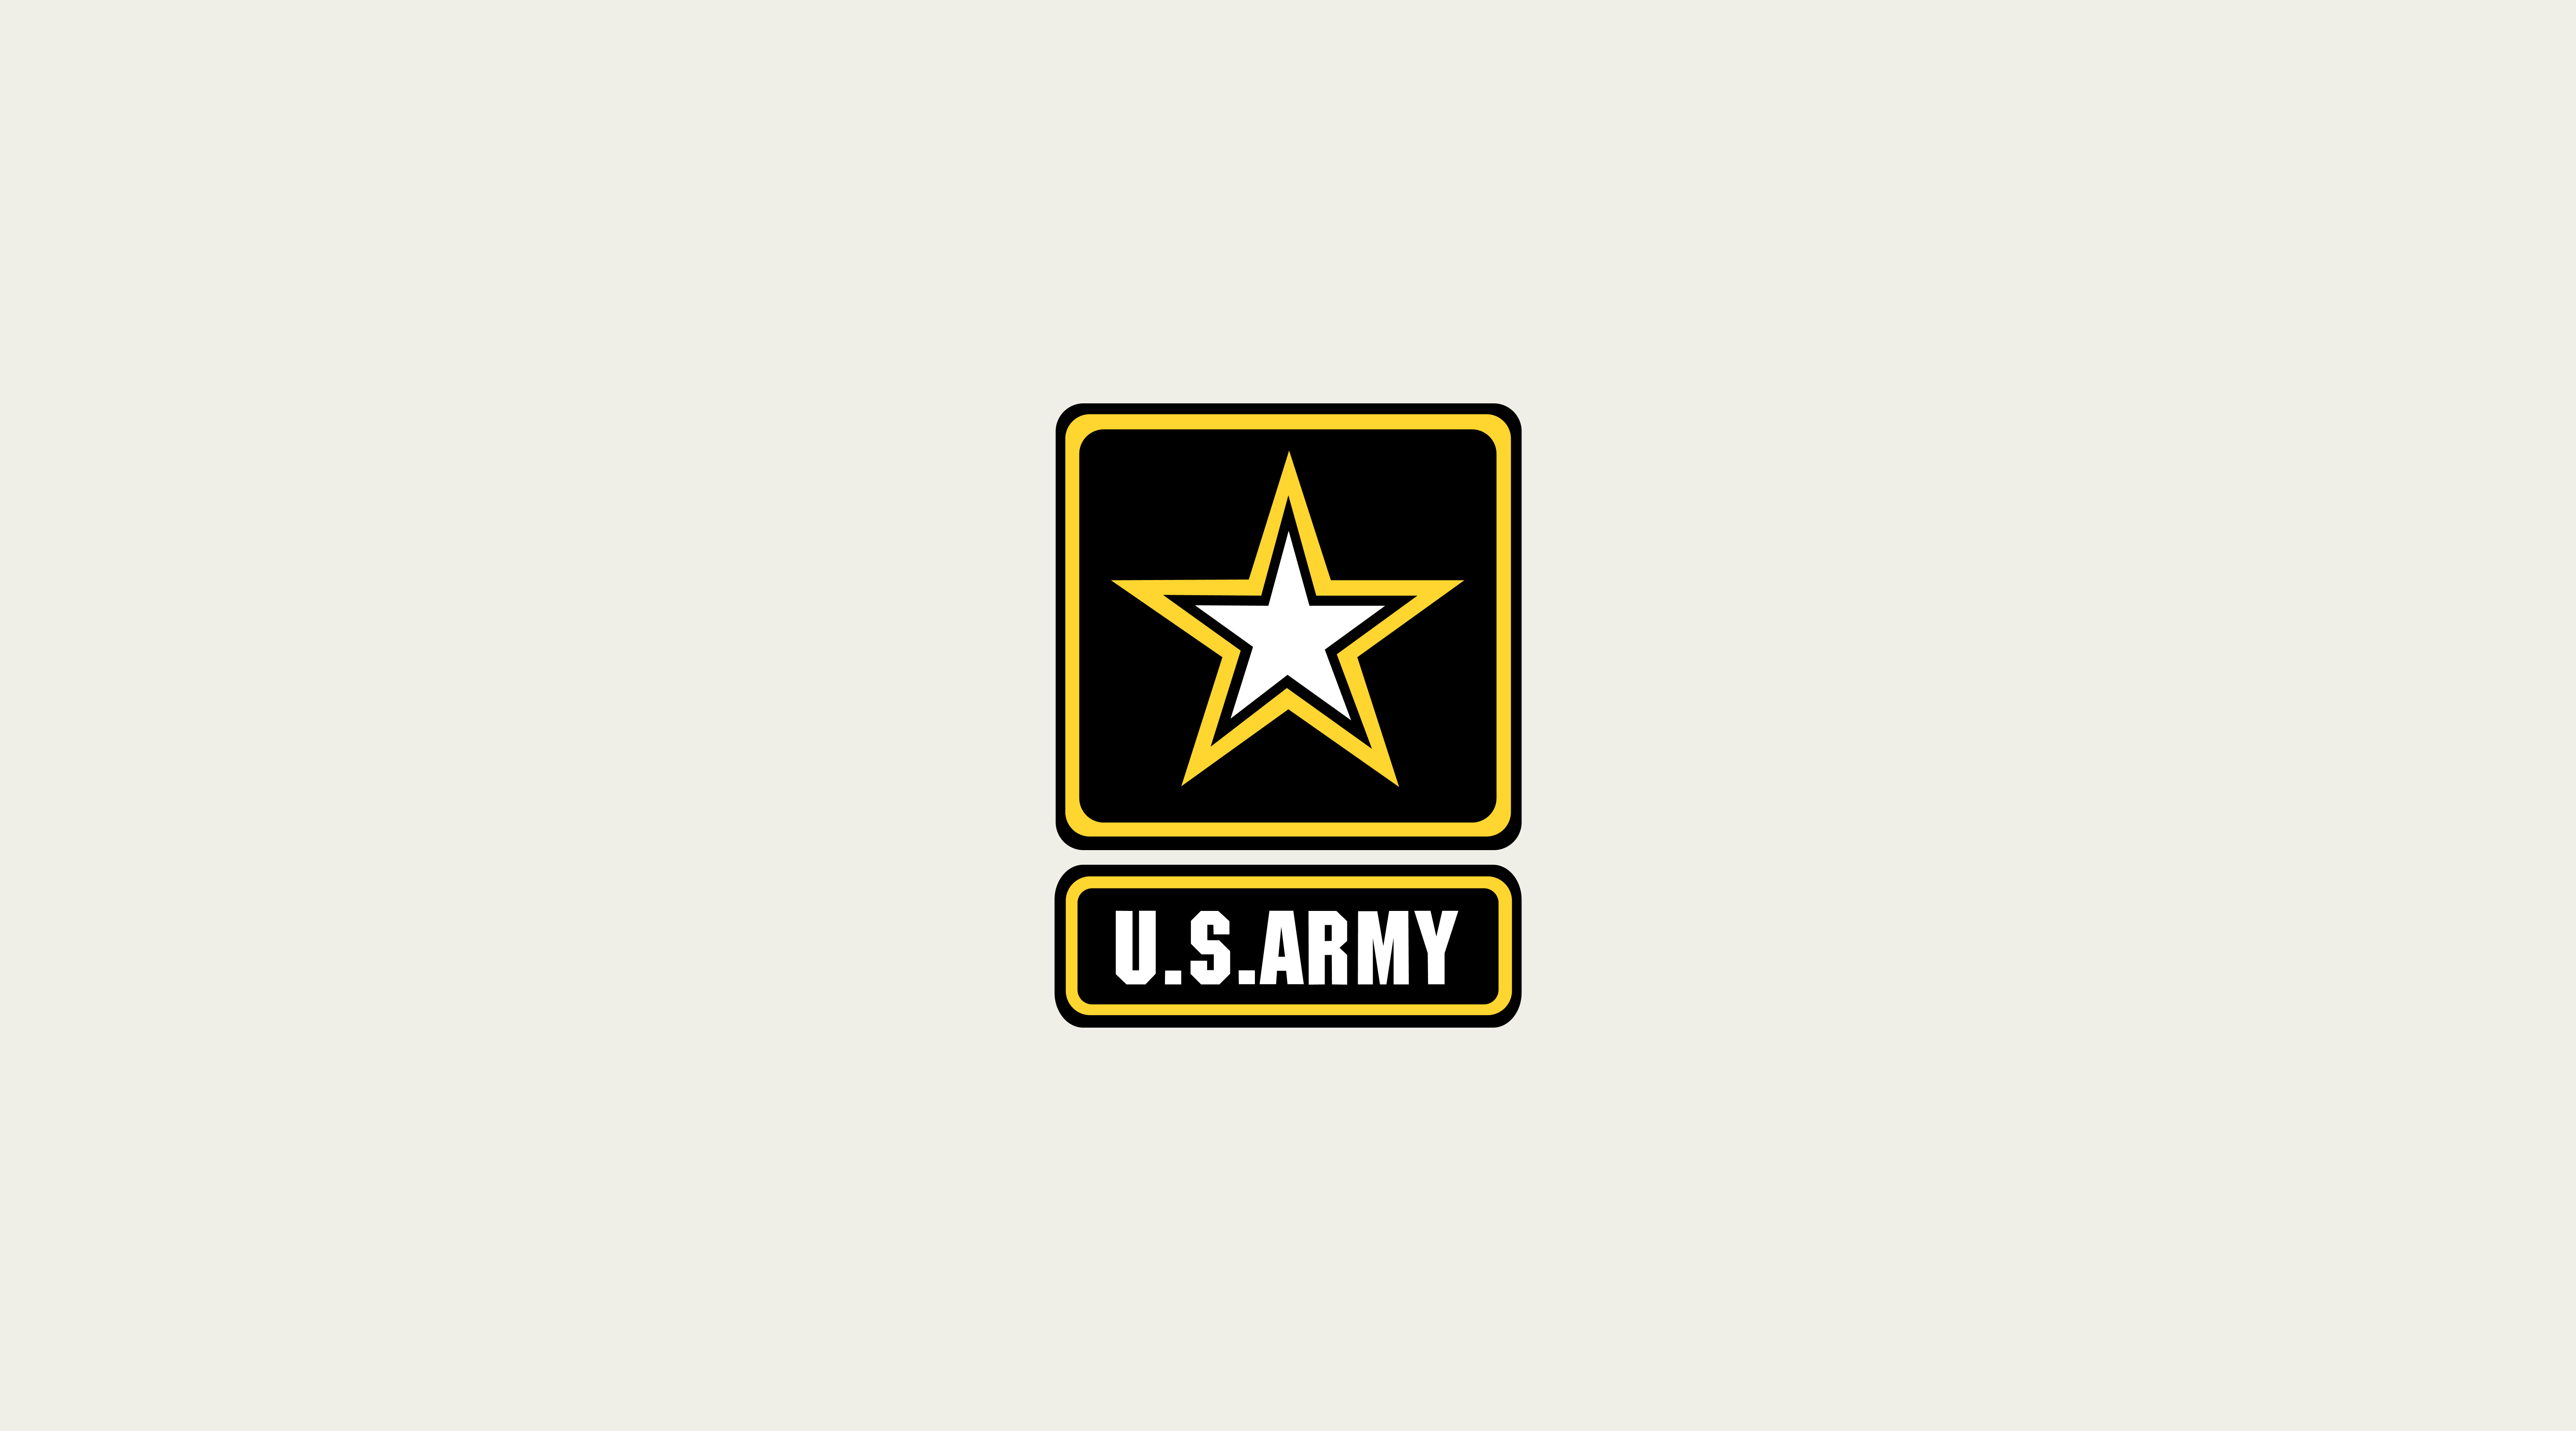 US Army logo on a neutral background